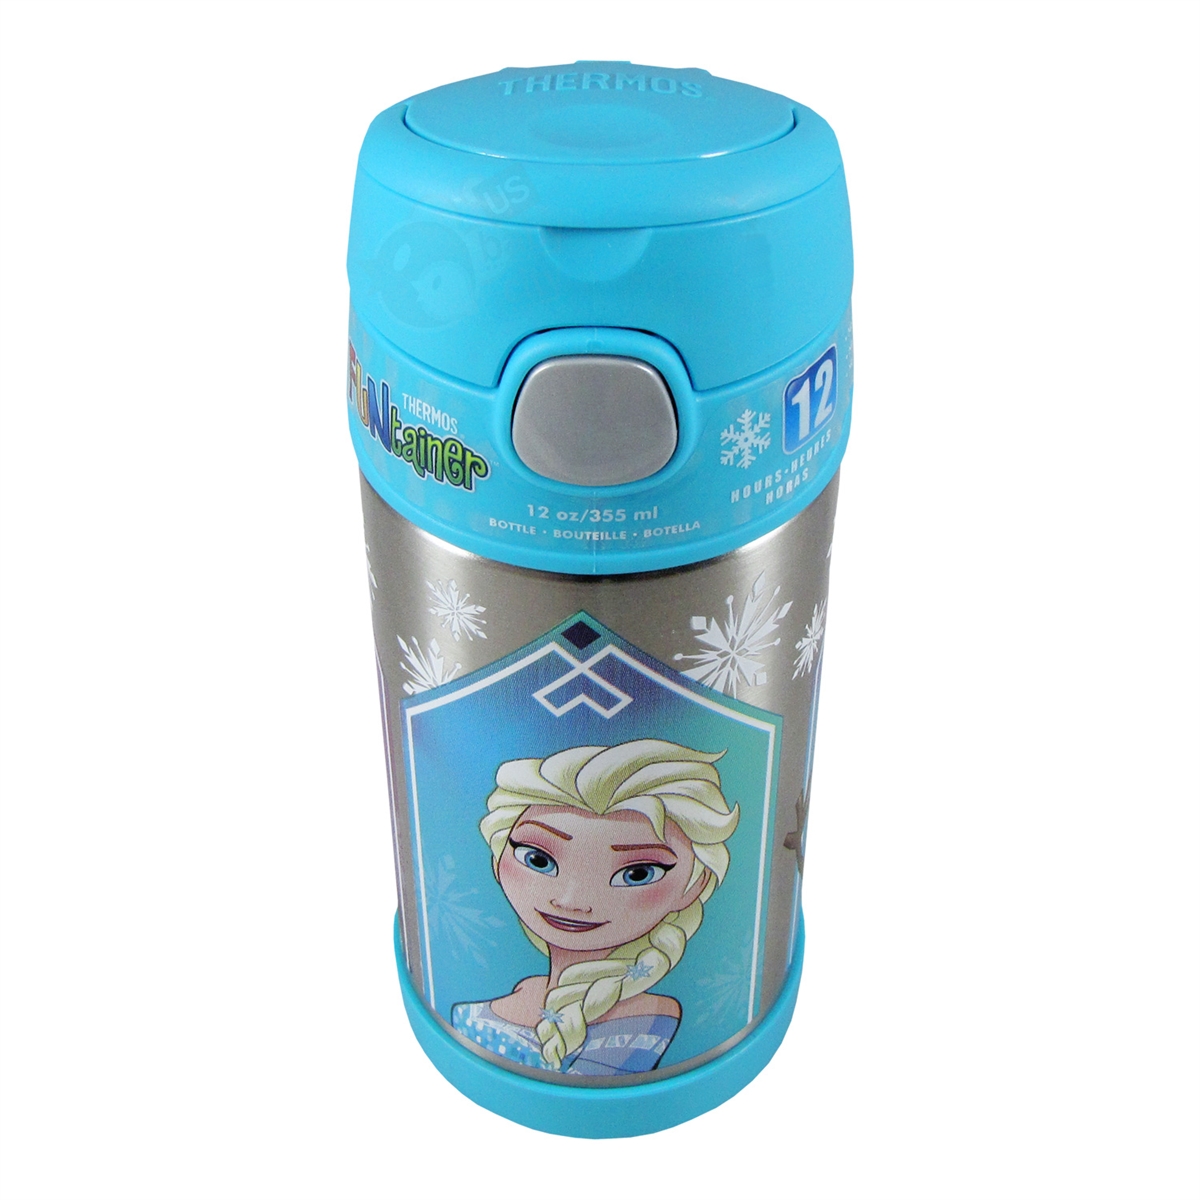 FUNtainer Bottle feat. Disney Frozen Olaf - 12 oz. (Thermos)